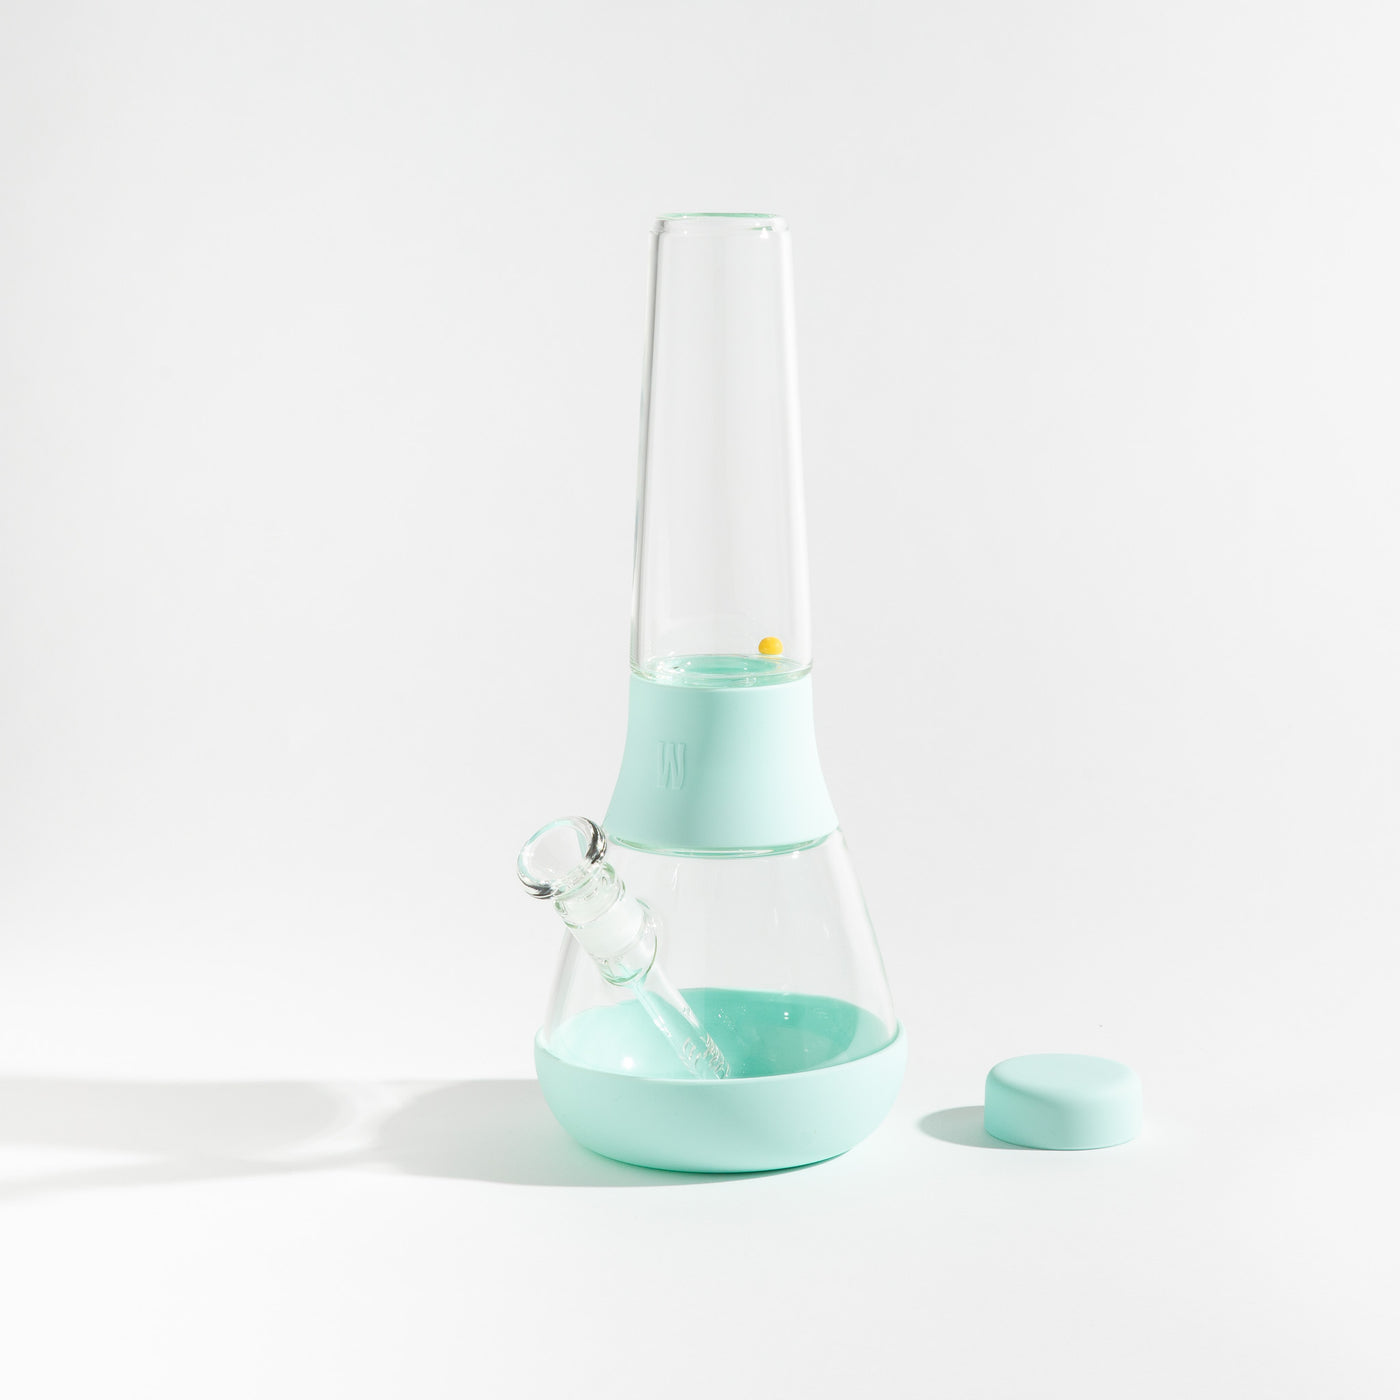 Product photo of a glass waterpipe with sky blue silicone covers, cap uncovered, placed on a table.